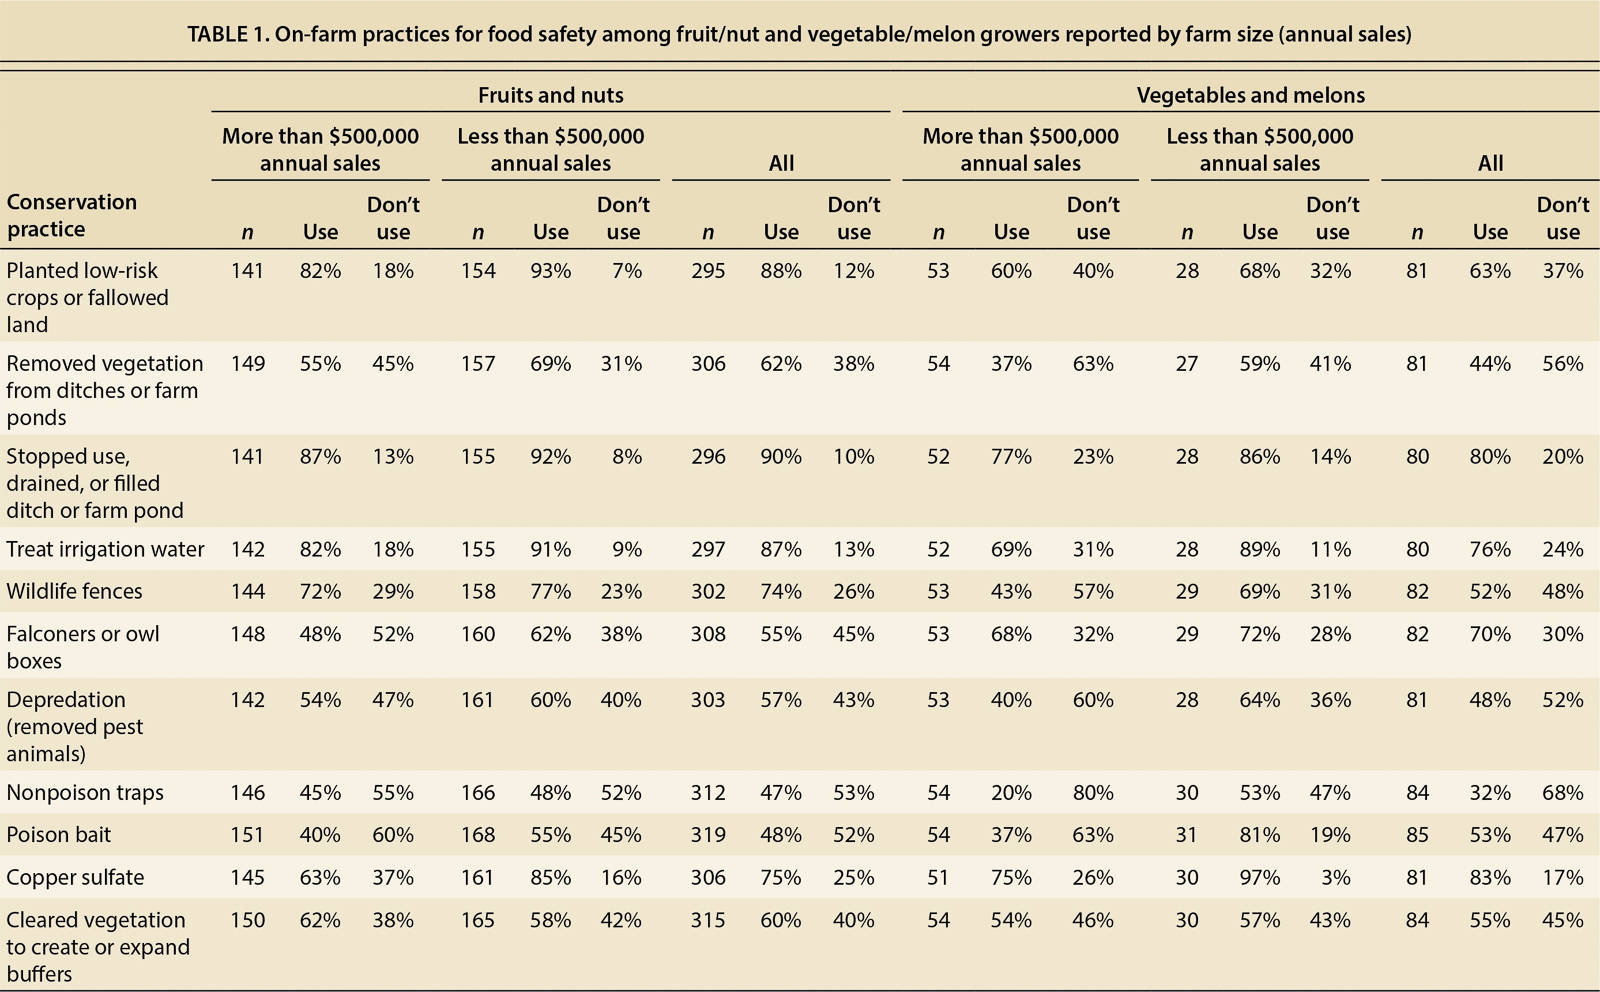 On-farm practices for food safety among fruit/nut and vegetable/melon growers reported by farm size (annual sales)